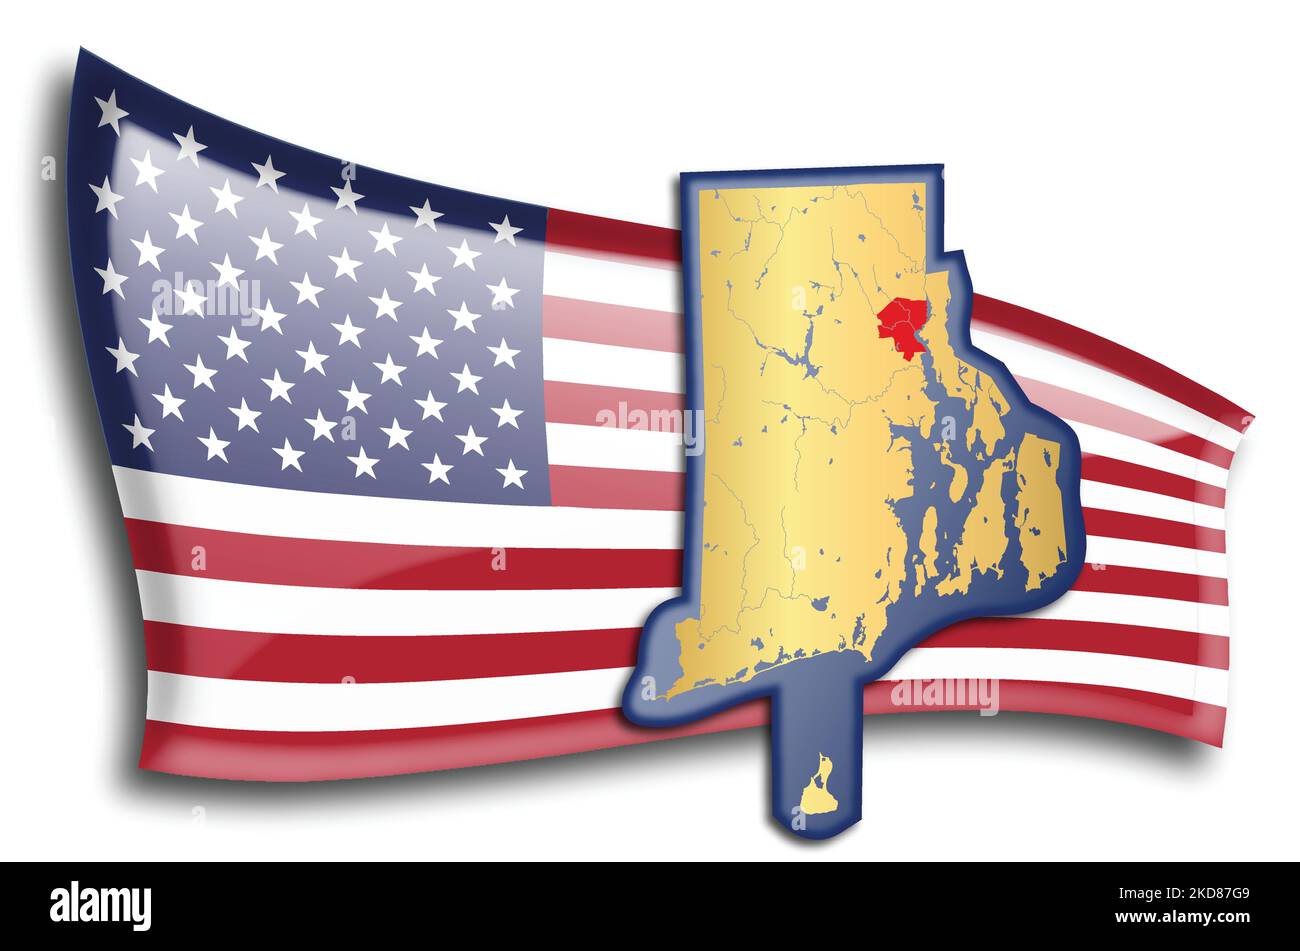 U.S. states - map of Rhode Island against an American flag. Rivers and lakes are shown on the map. American Flag and State Map can be used separately Stock Vector